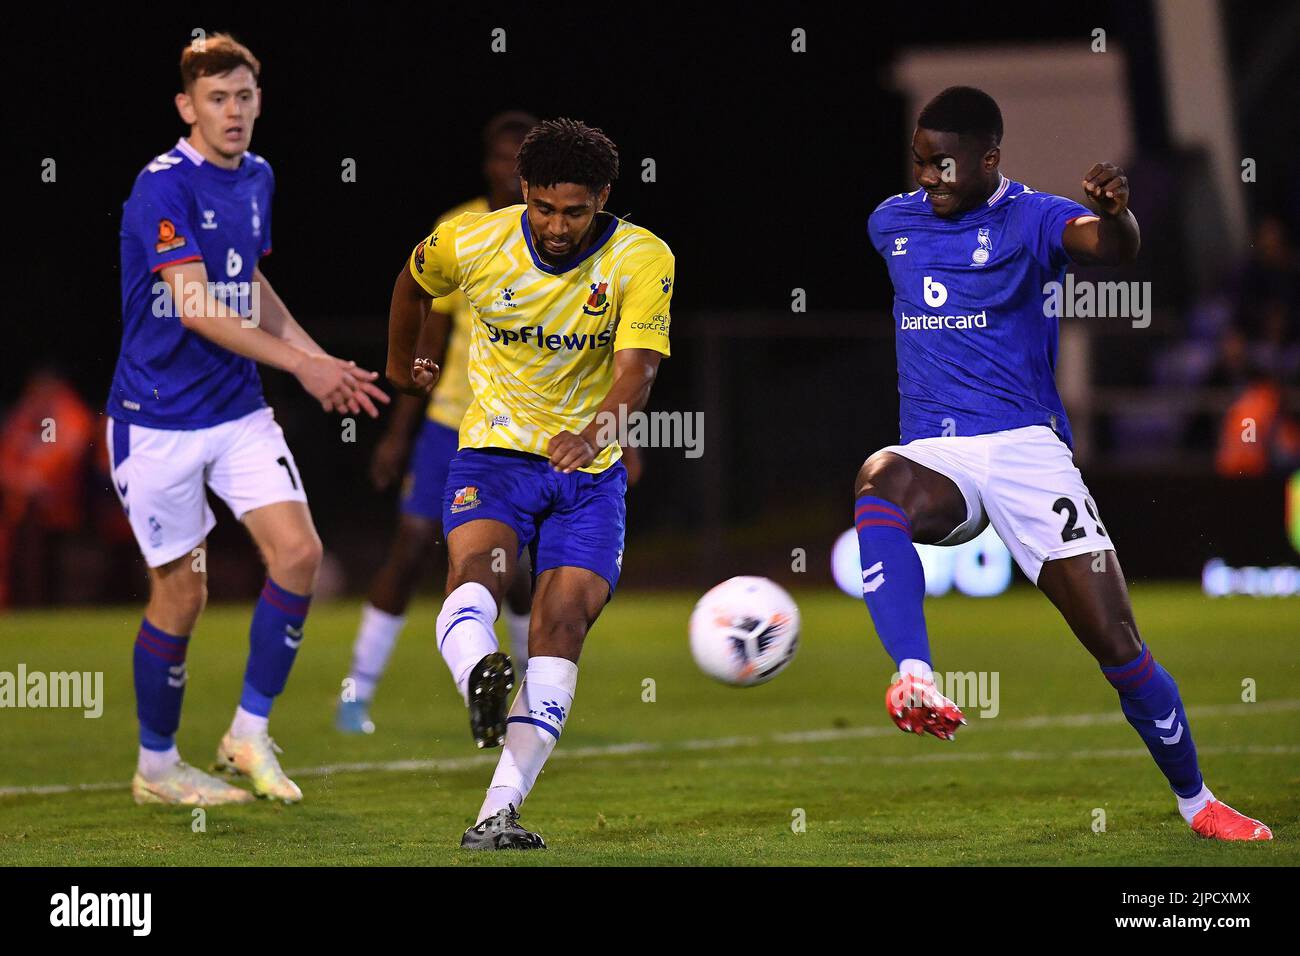 Junior Luamba of Oldham Athletic tussles with Ashley Charles of Wealdstone Football Club during the Vanarama National League match between Oldham Athletic and Wealdstone at Boundary Park, Oldham on Wednesday 17th August 2022. (Credit: Eddie Garvey | MI News) Credit: MI News & Sport /Alamy Live News Stock Photo